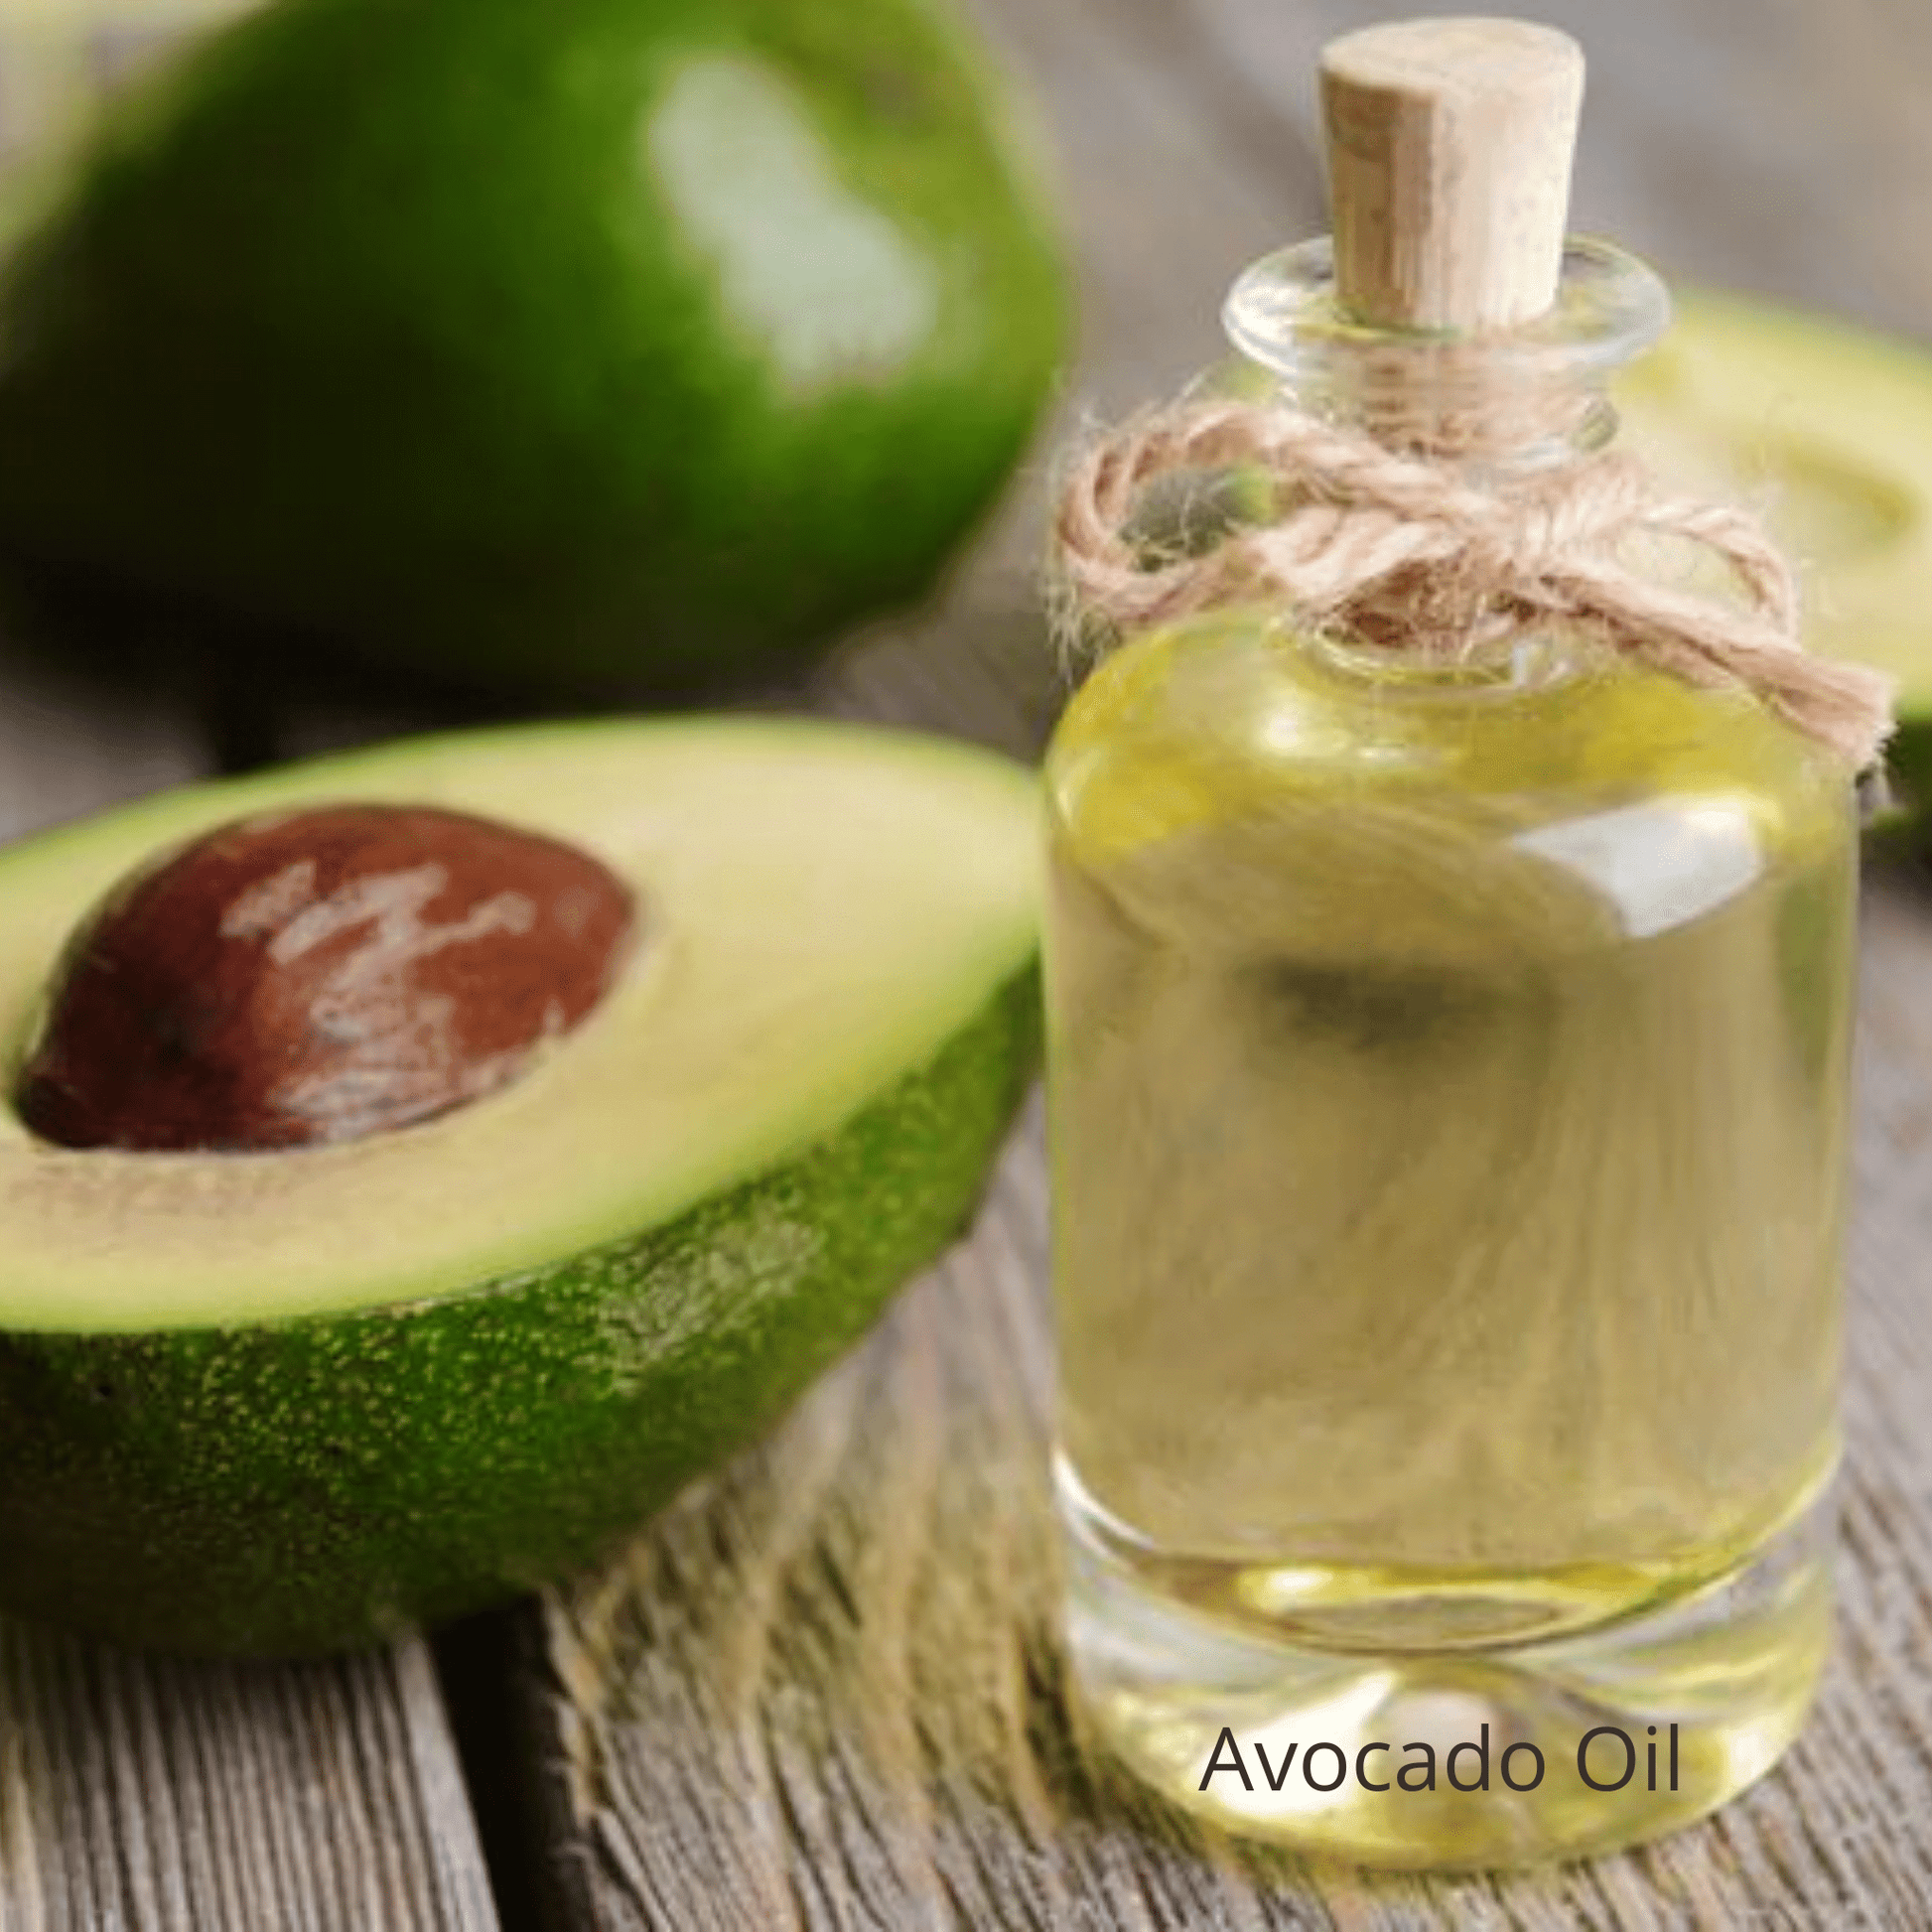 Be Green Bath and Body Serum for Dry/Normal/Mature Skin contains avocado oil